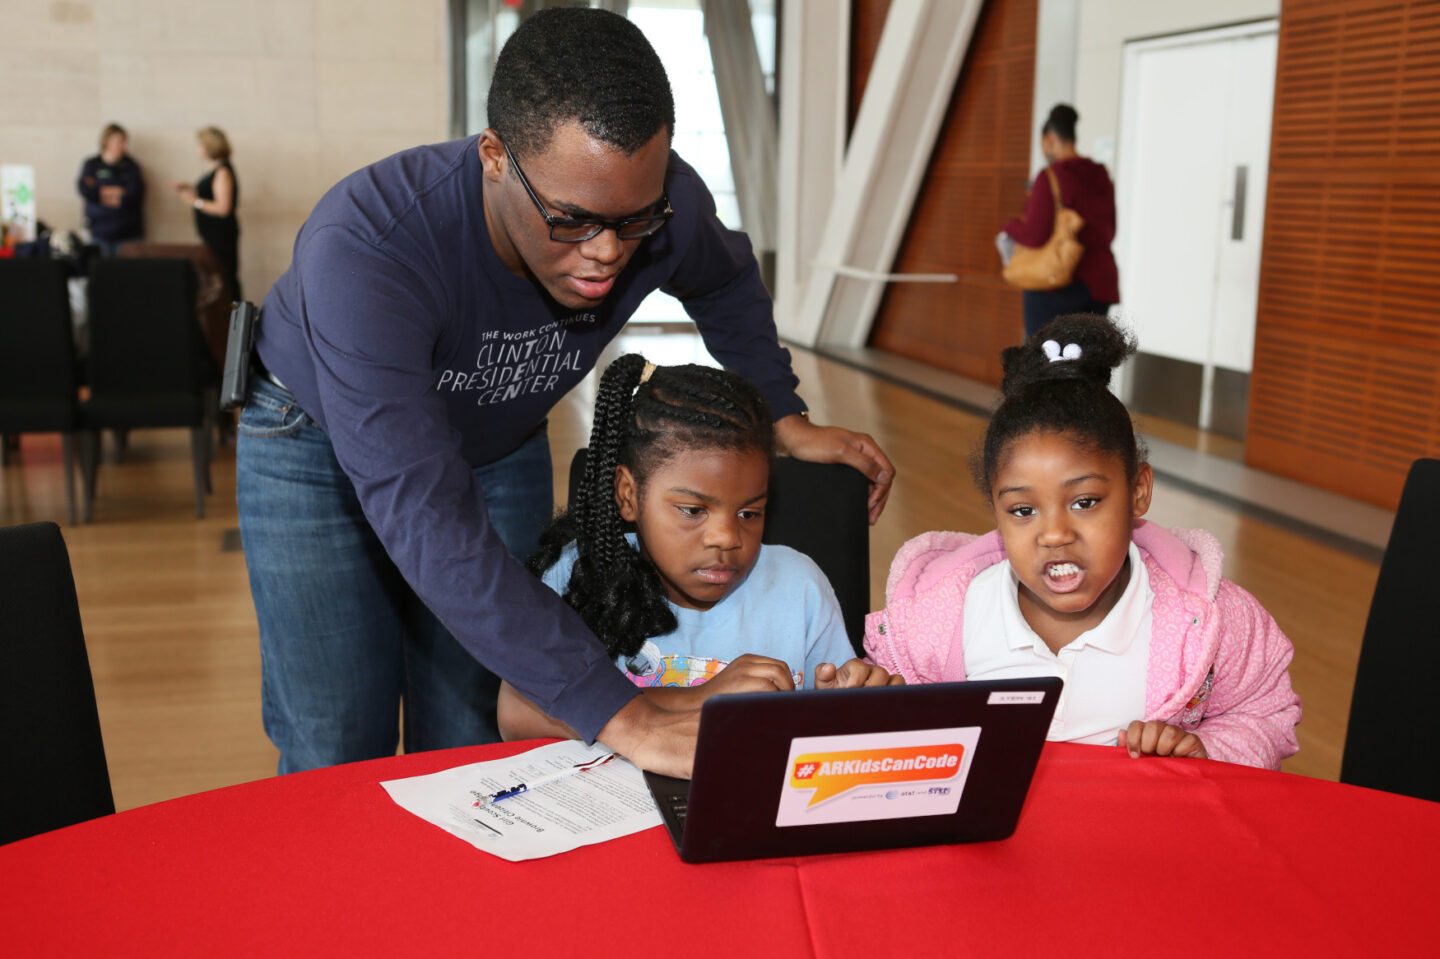 A staff member and two children use a computer with a sticker that reads #ARKidsCanCode